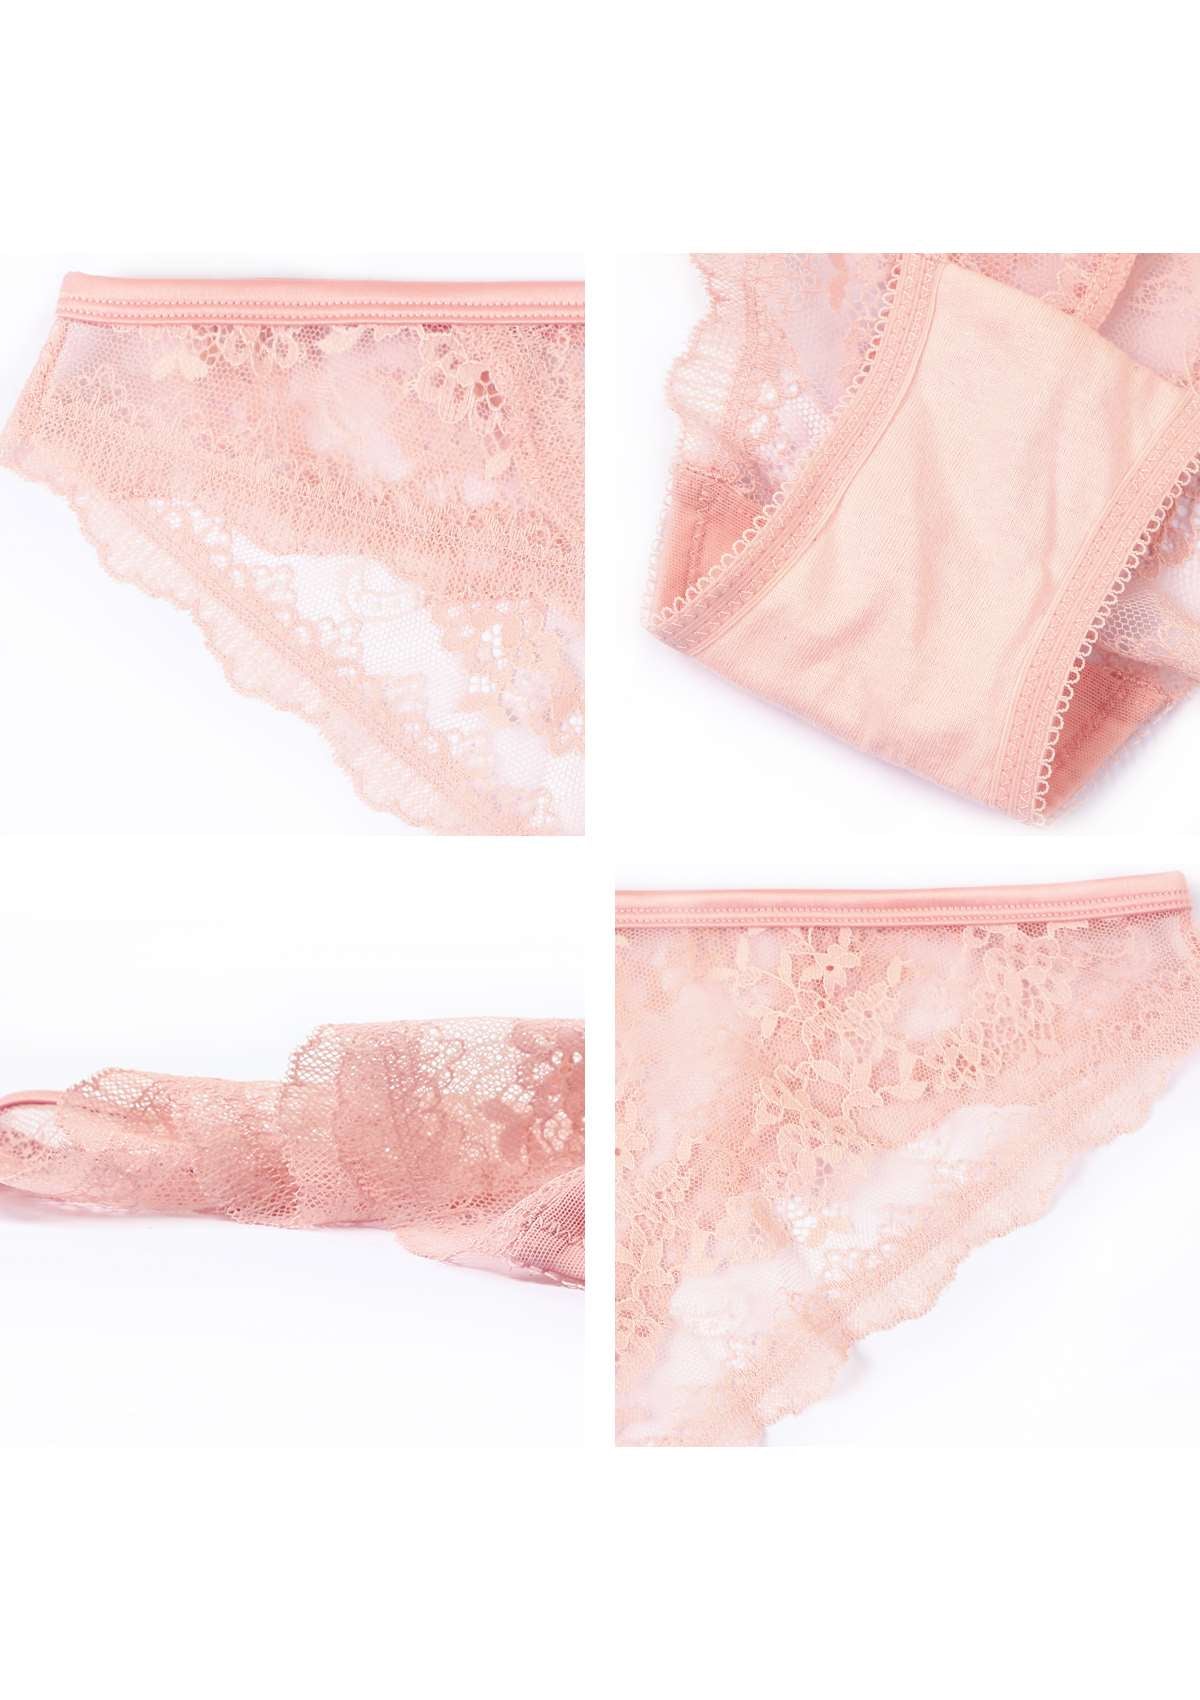 HSIA Floral Bridal Lace Back Cheeky Delicate Underwear  - Pink / L